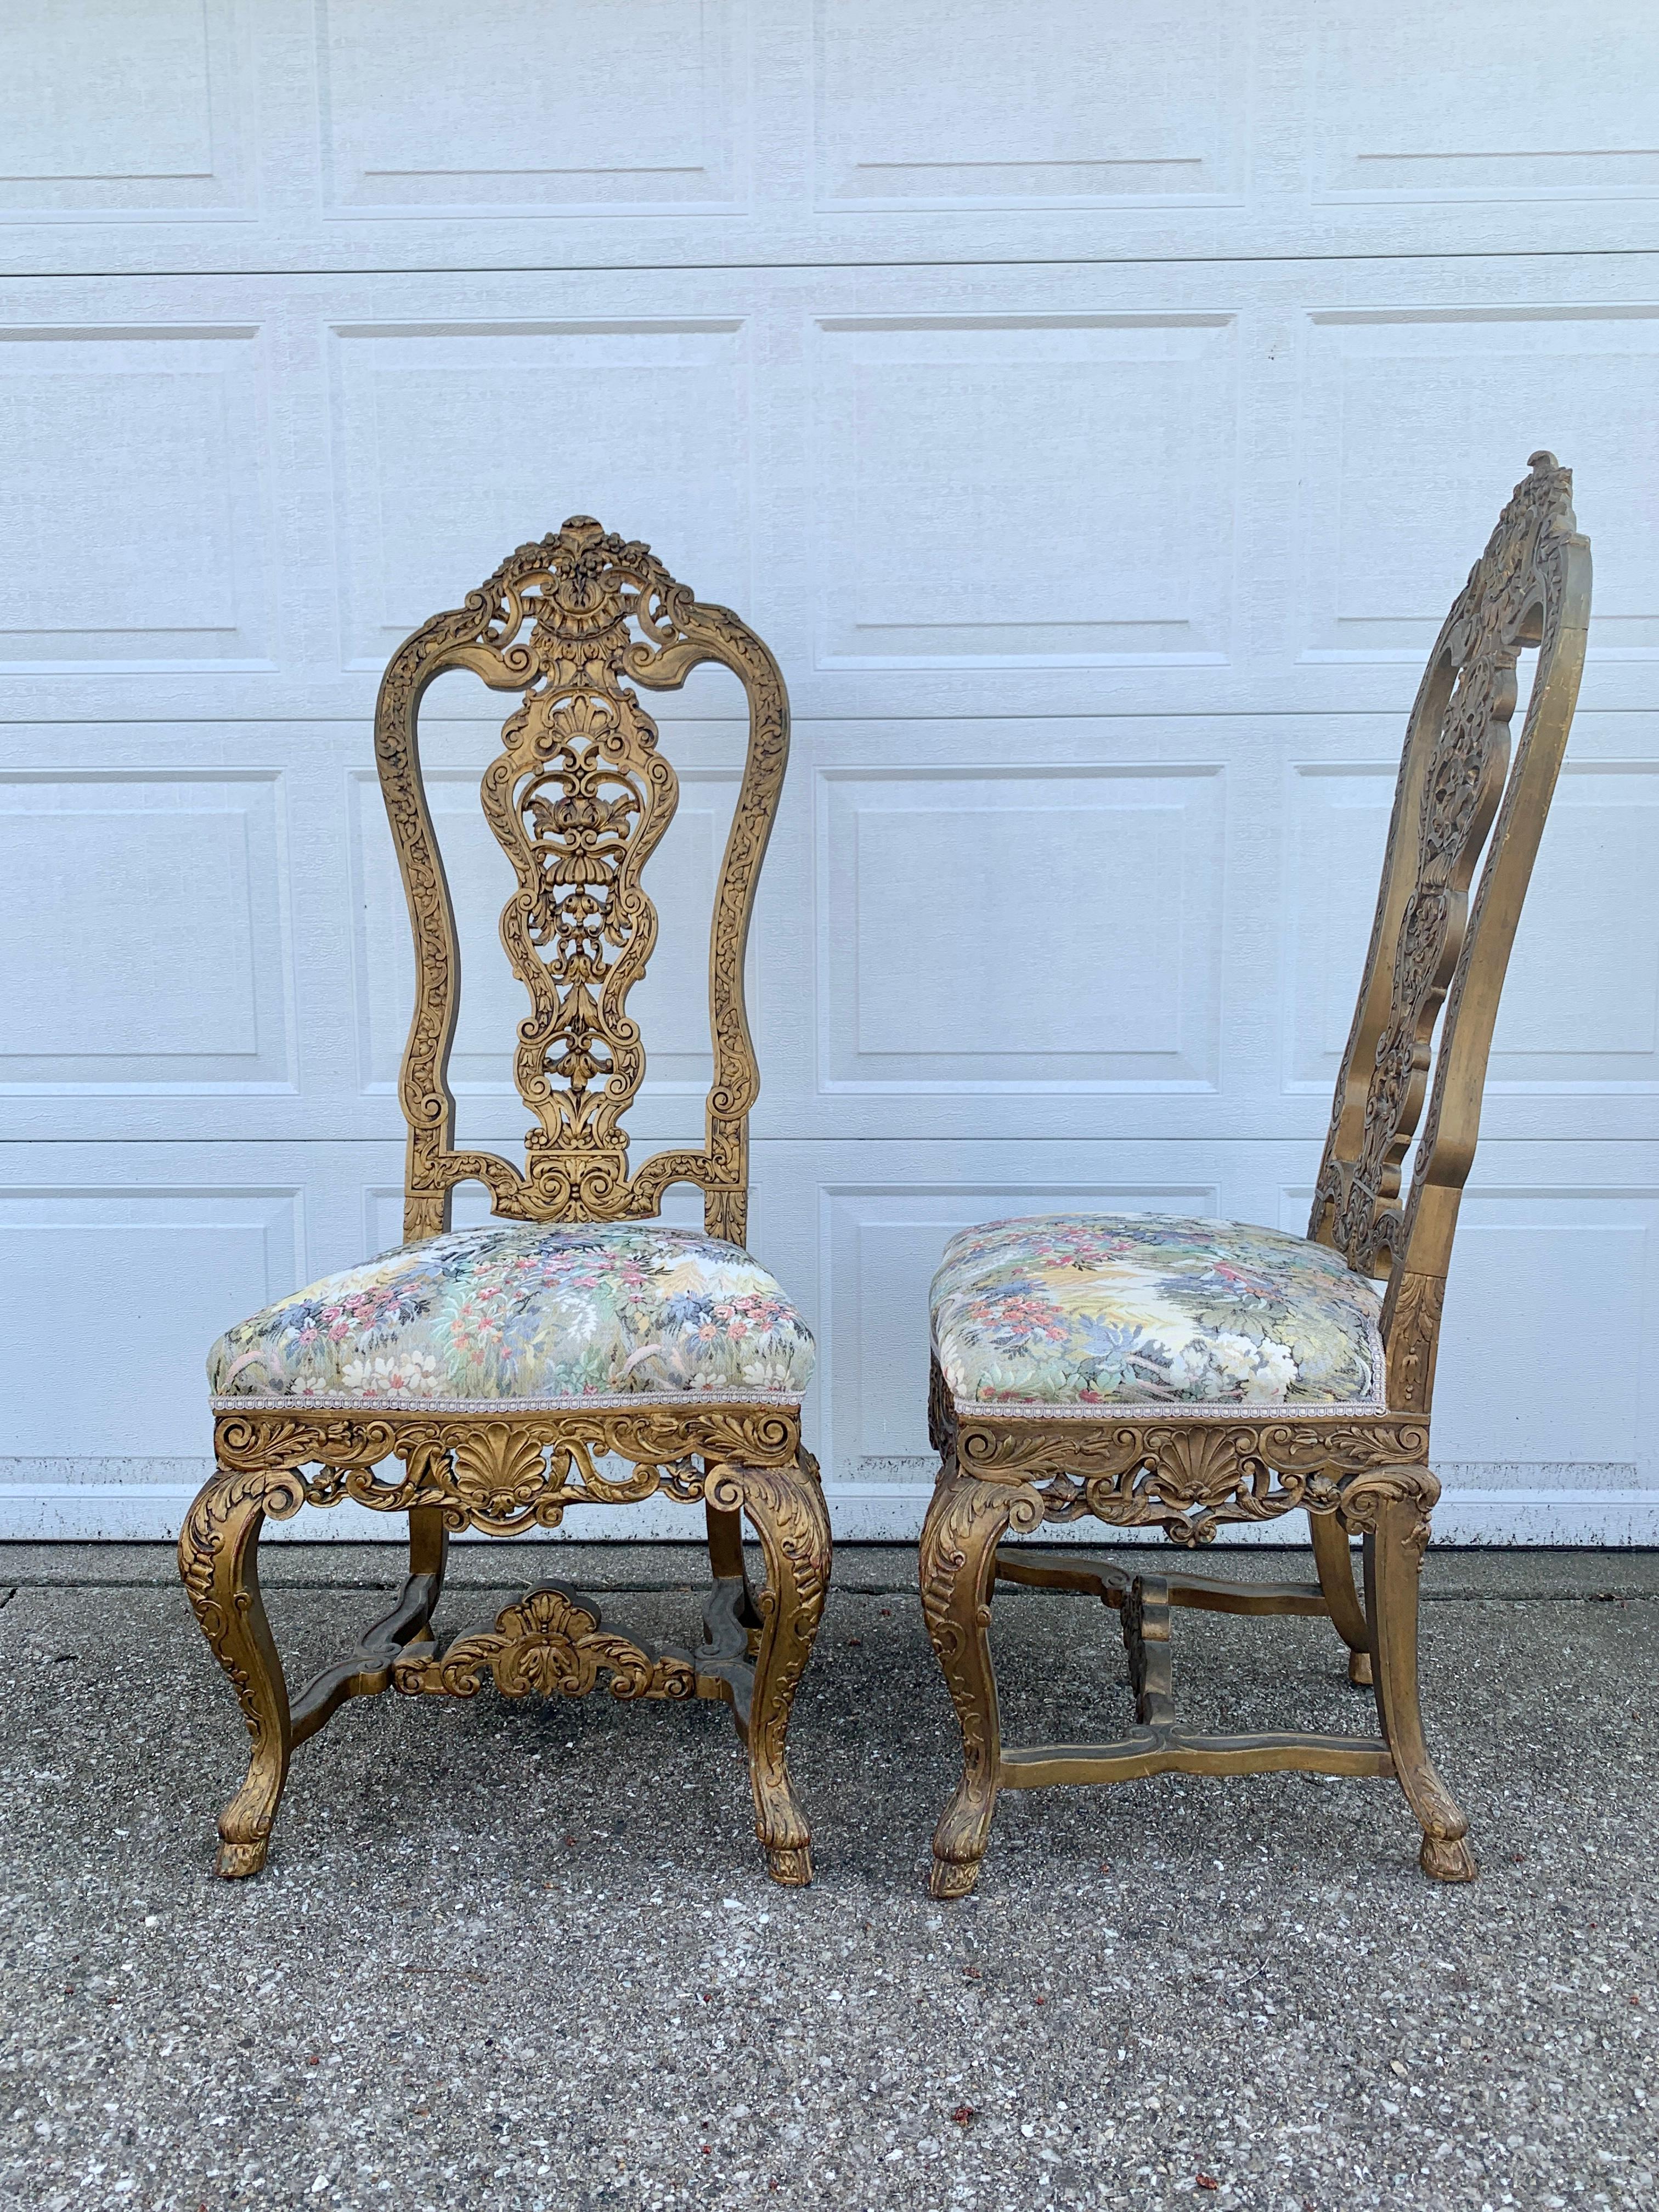 Upholstery 19th Century Antique Venetian Carved Gold Giltwood Throne Chairs, Pair For Sale